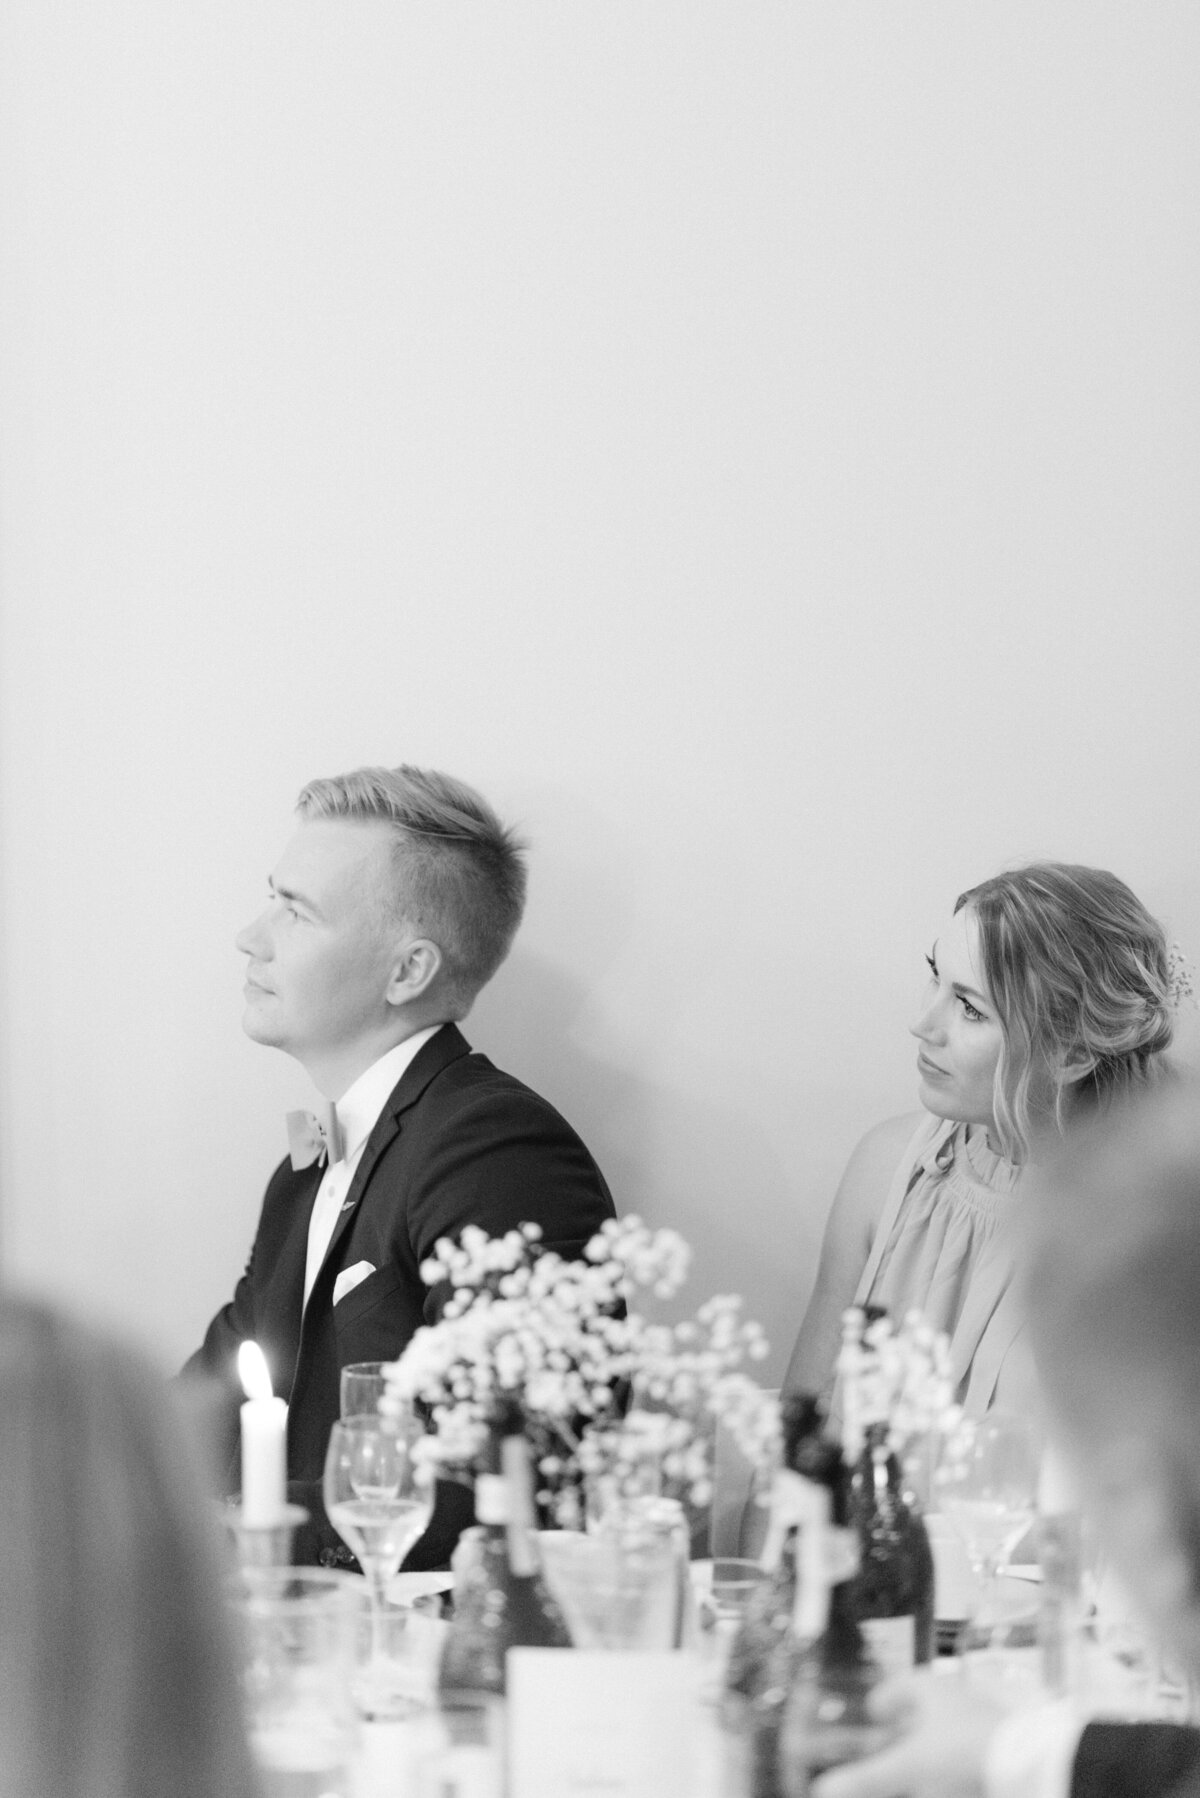 Documentary wedding photograph of wedding guests listening to a speech to bride and groom in Airisniemi manor in Turku, Finland. Atmosphere captured by wedding photographer Hannika Gabrielsson.